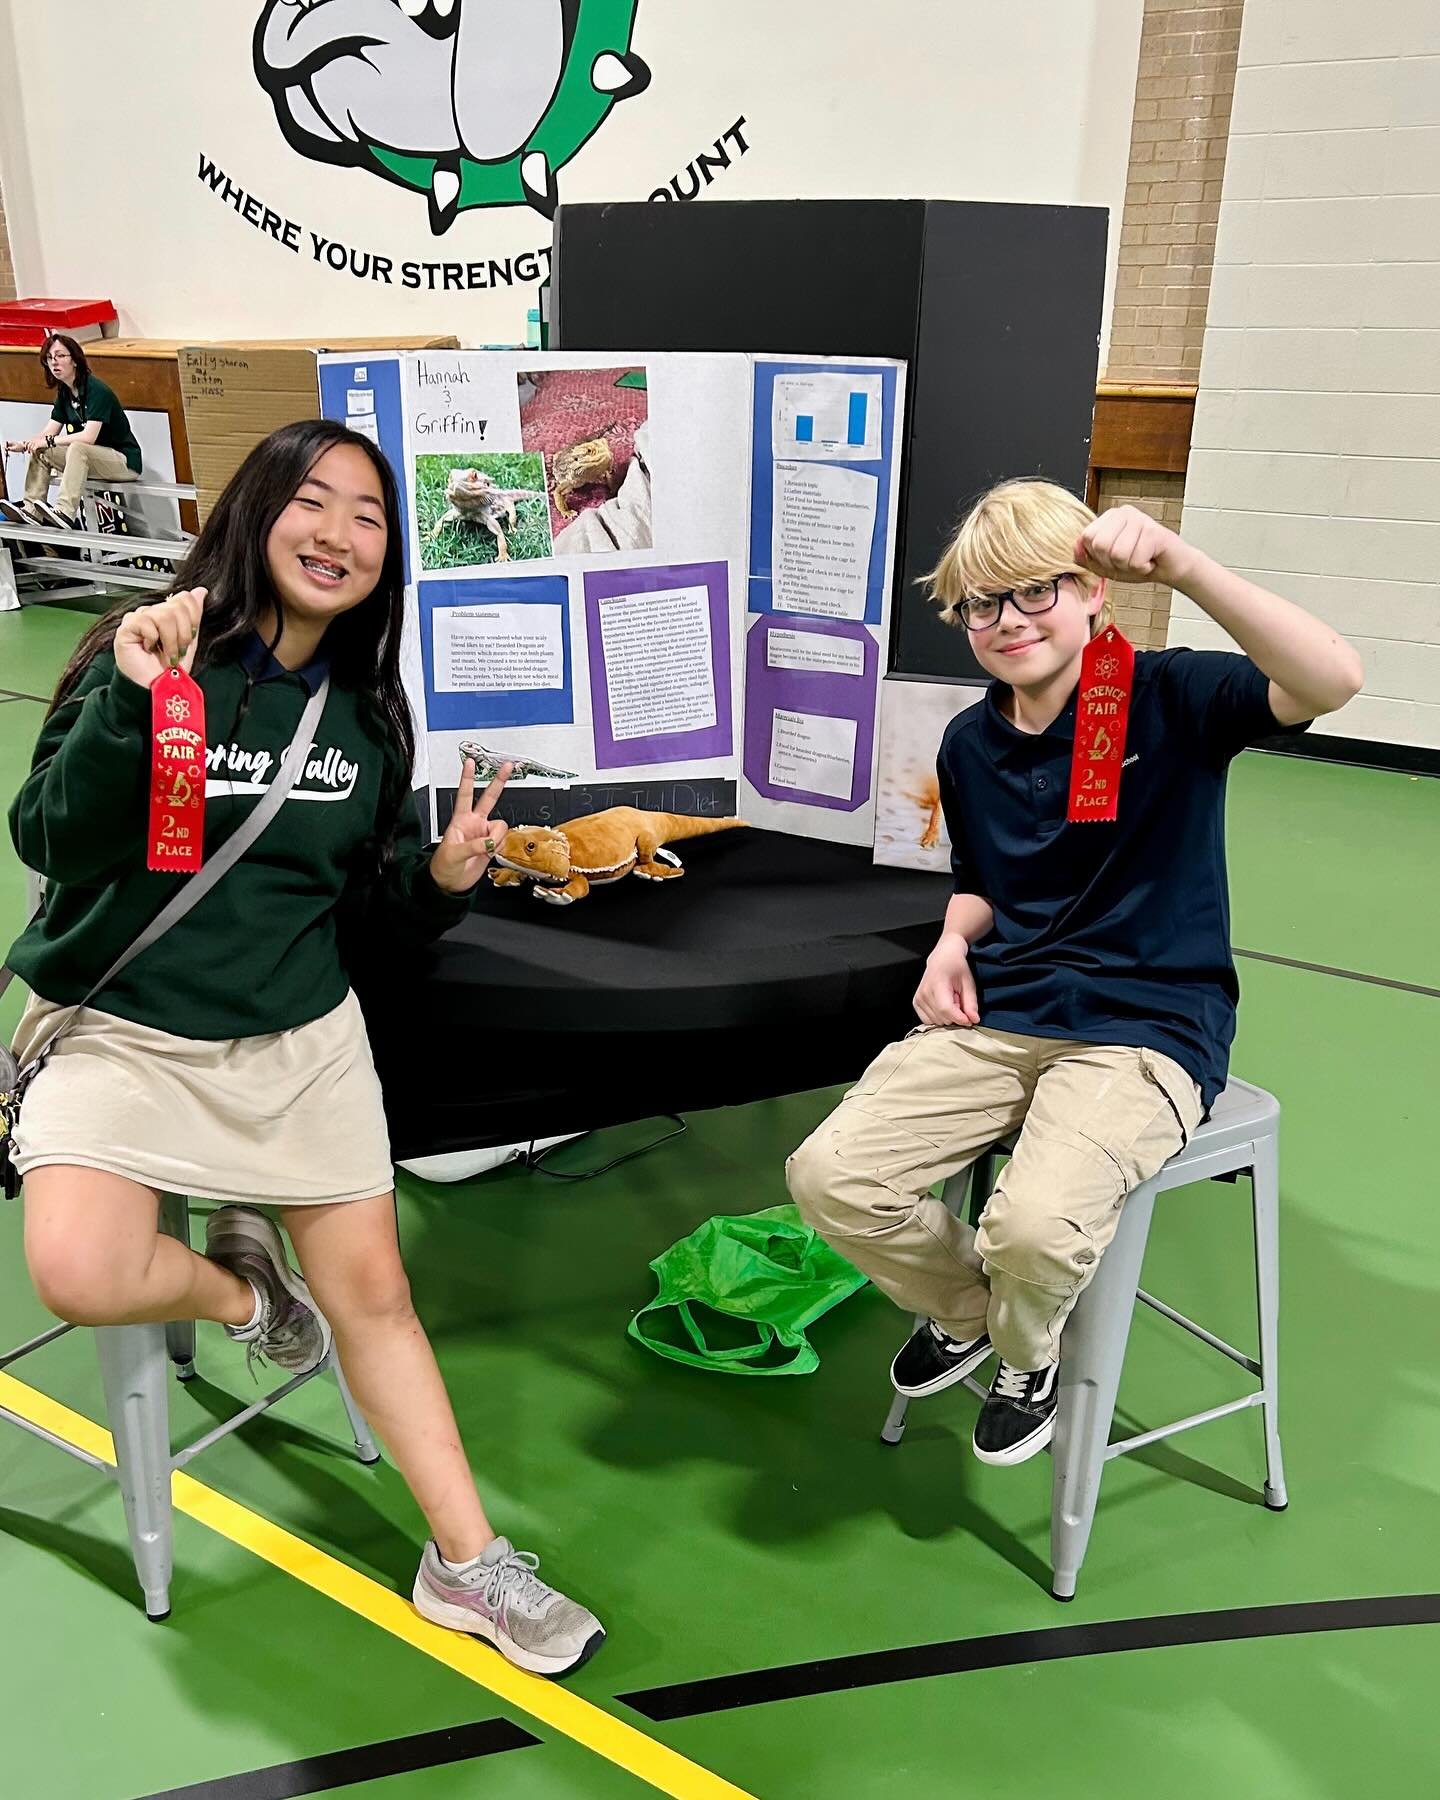 Last week was a big one for this kiddo! 🏆🎂

&mdash;Griffin placed 2nd in Life Sciences division at the middle school science fair with his partner Hannah. 
&mdash;He received the &ldquo;Stand Up Award&rdquo; at Honors Day described as &ldquo;A stu